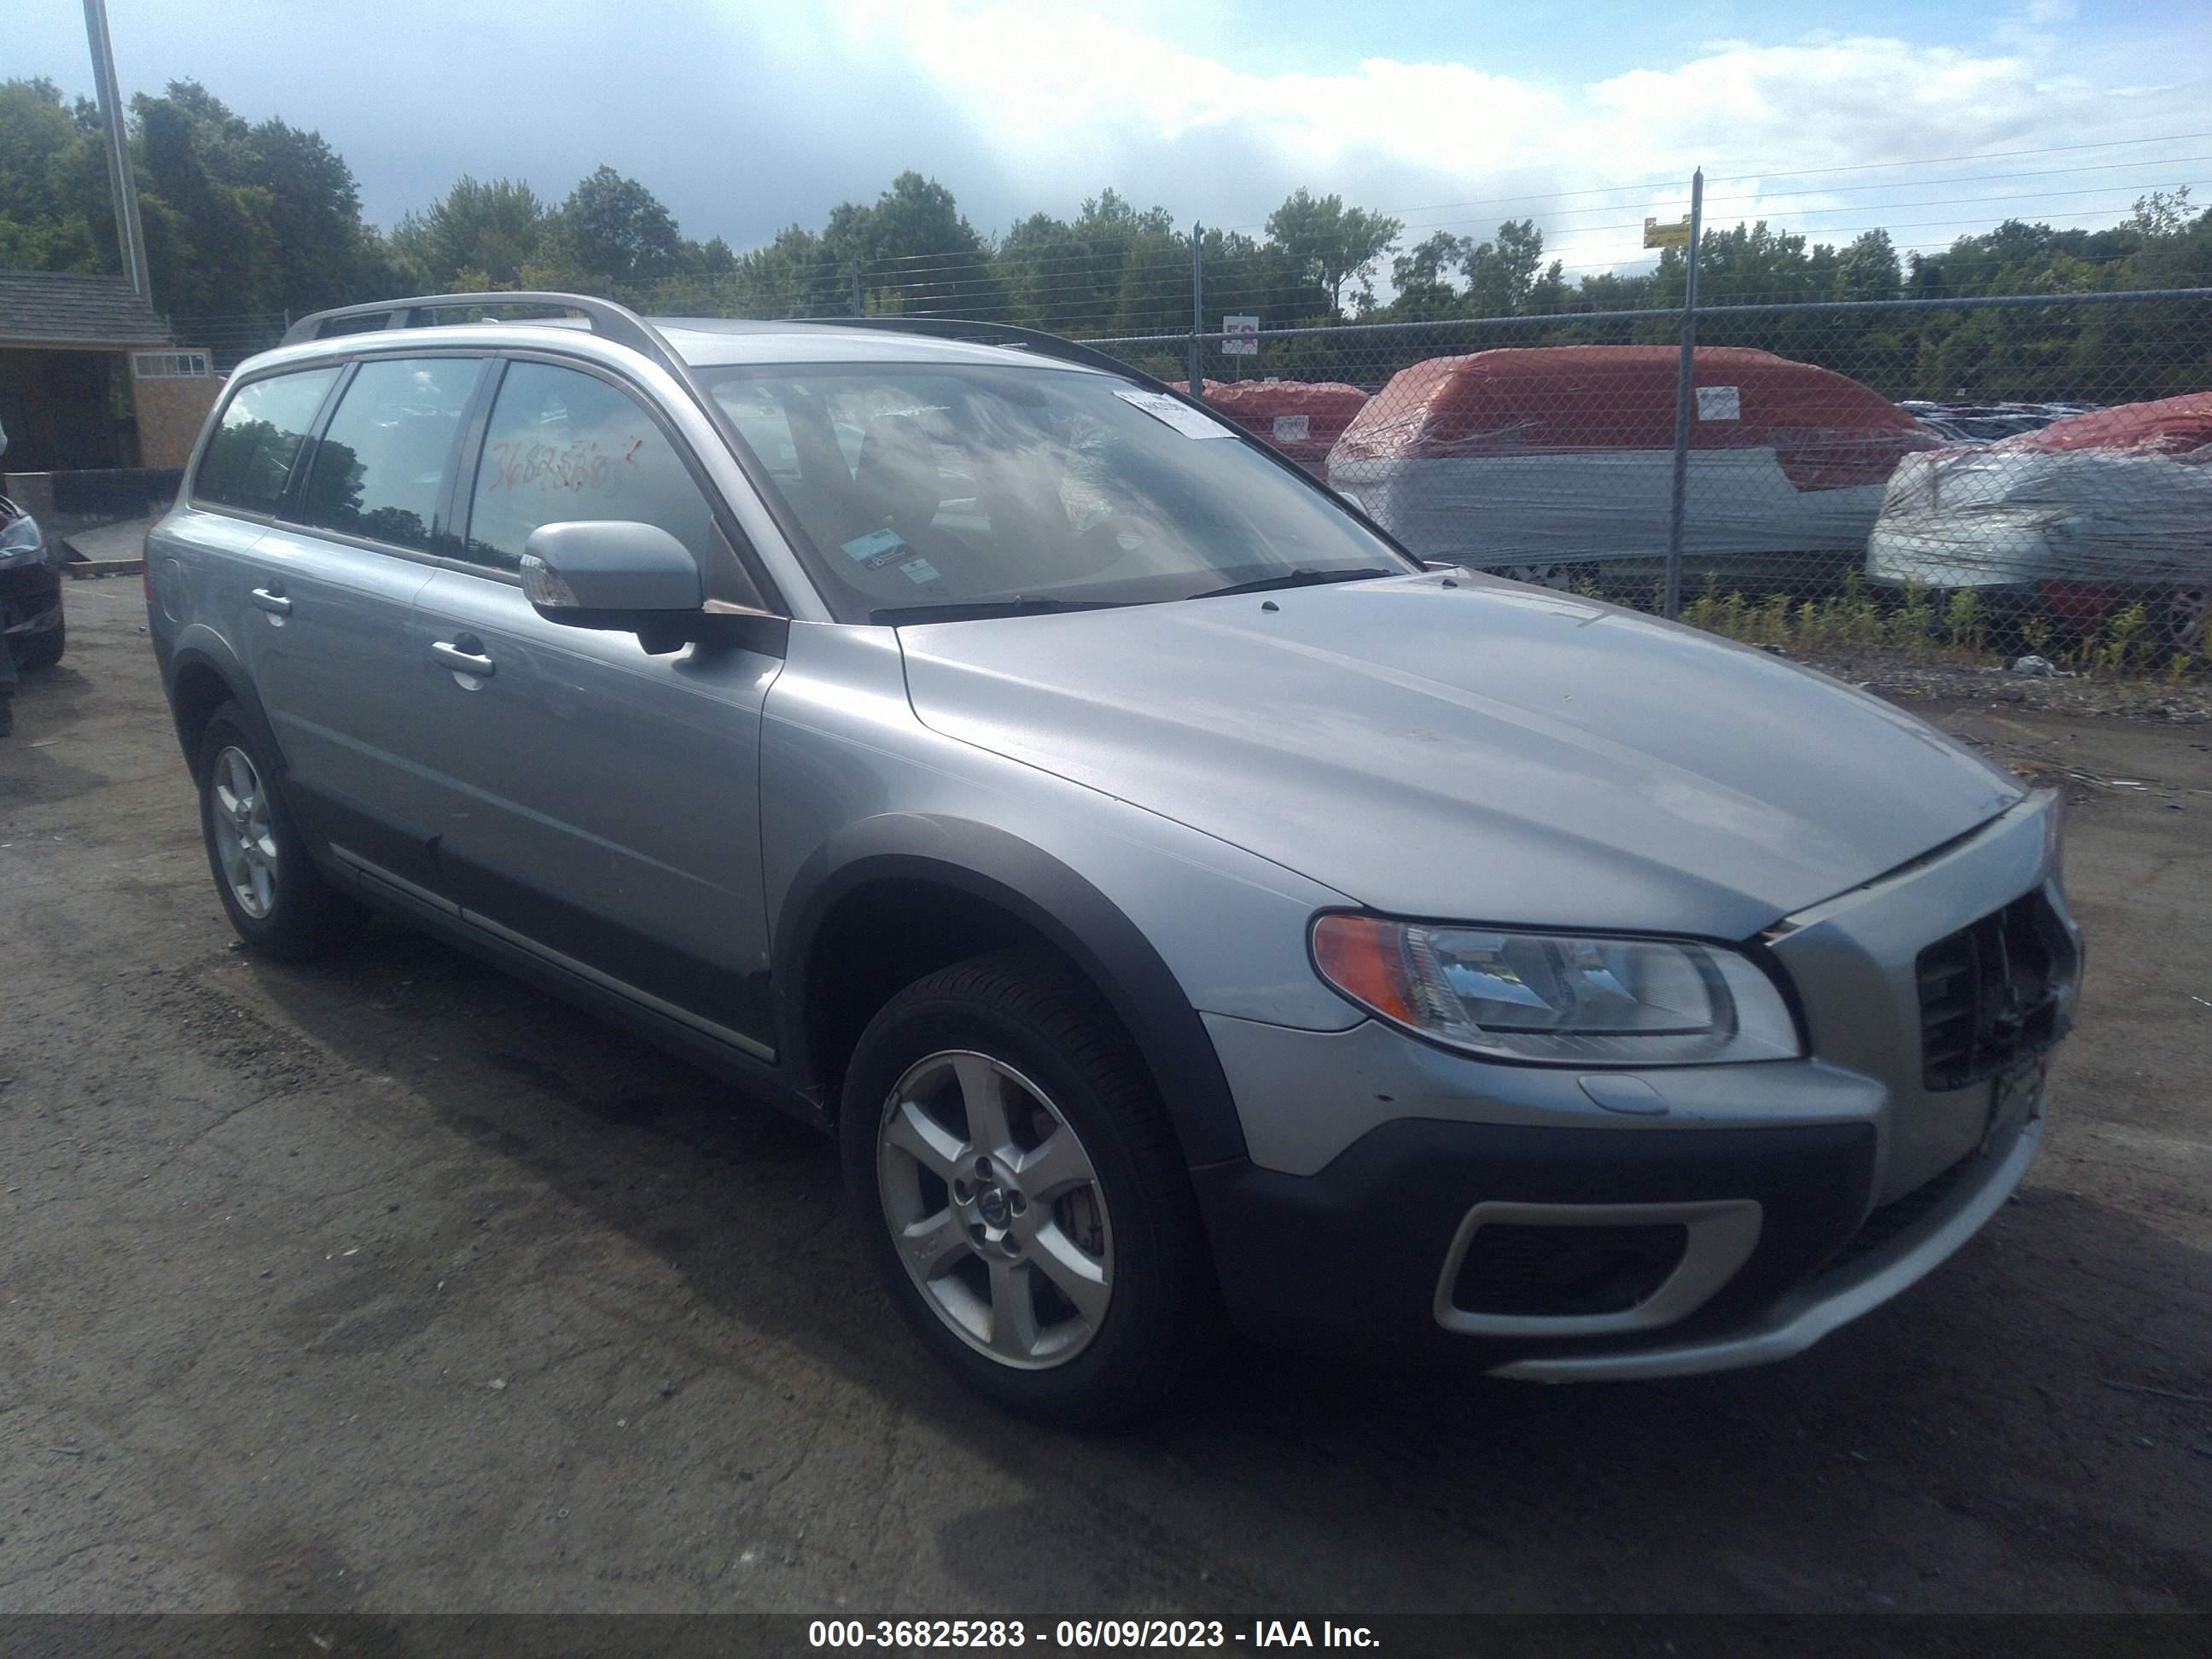 vin: YV4BZ982691064461 YV4BZ982691064461 2009 volvo xc70 3200 for Sale in 06088, 47 Newberry Rd., East Windsor, USA